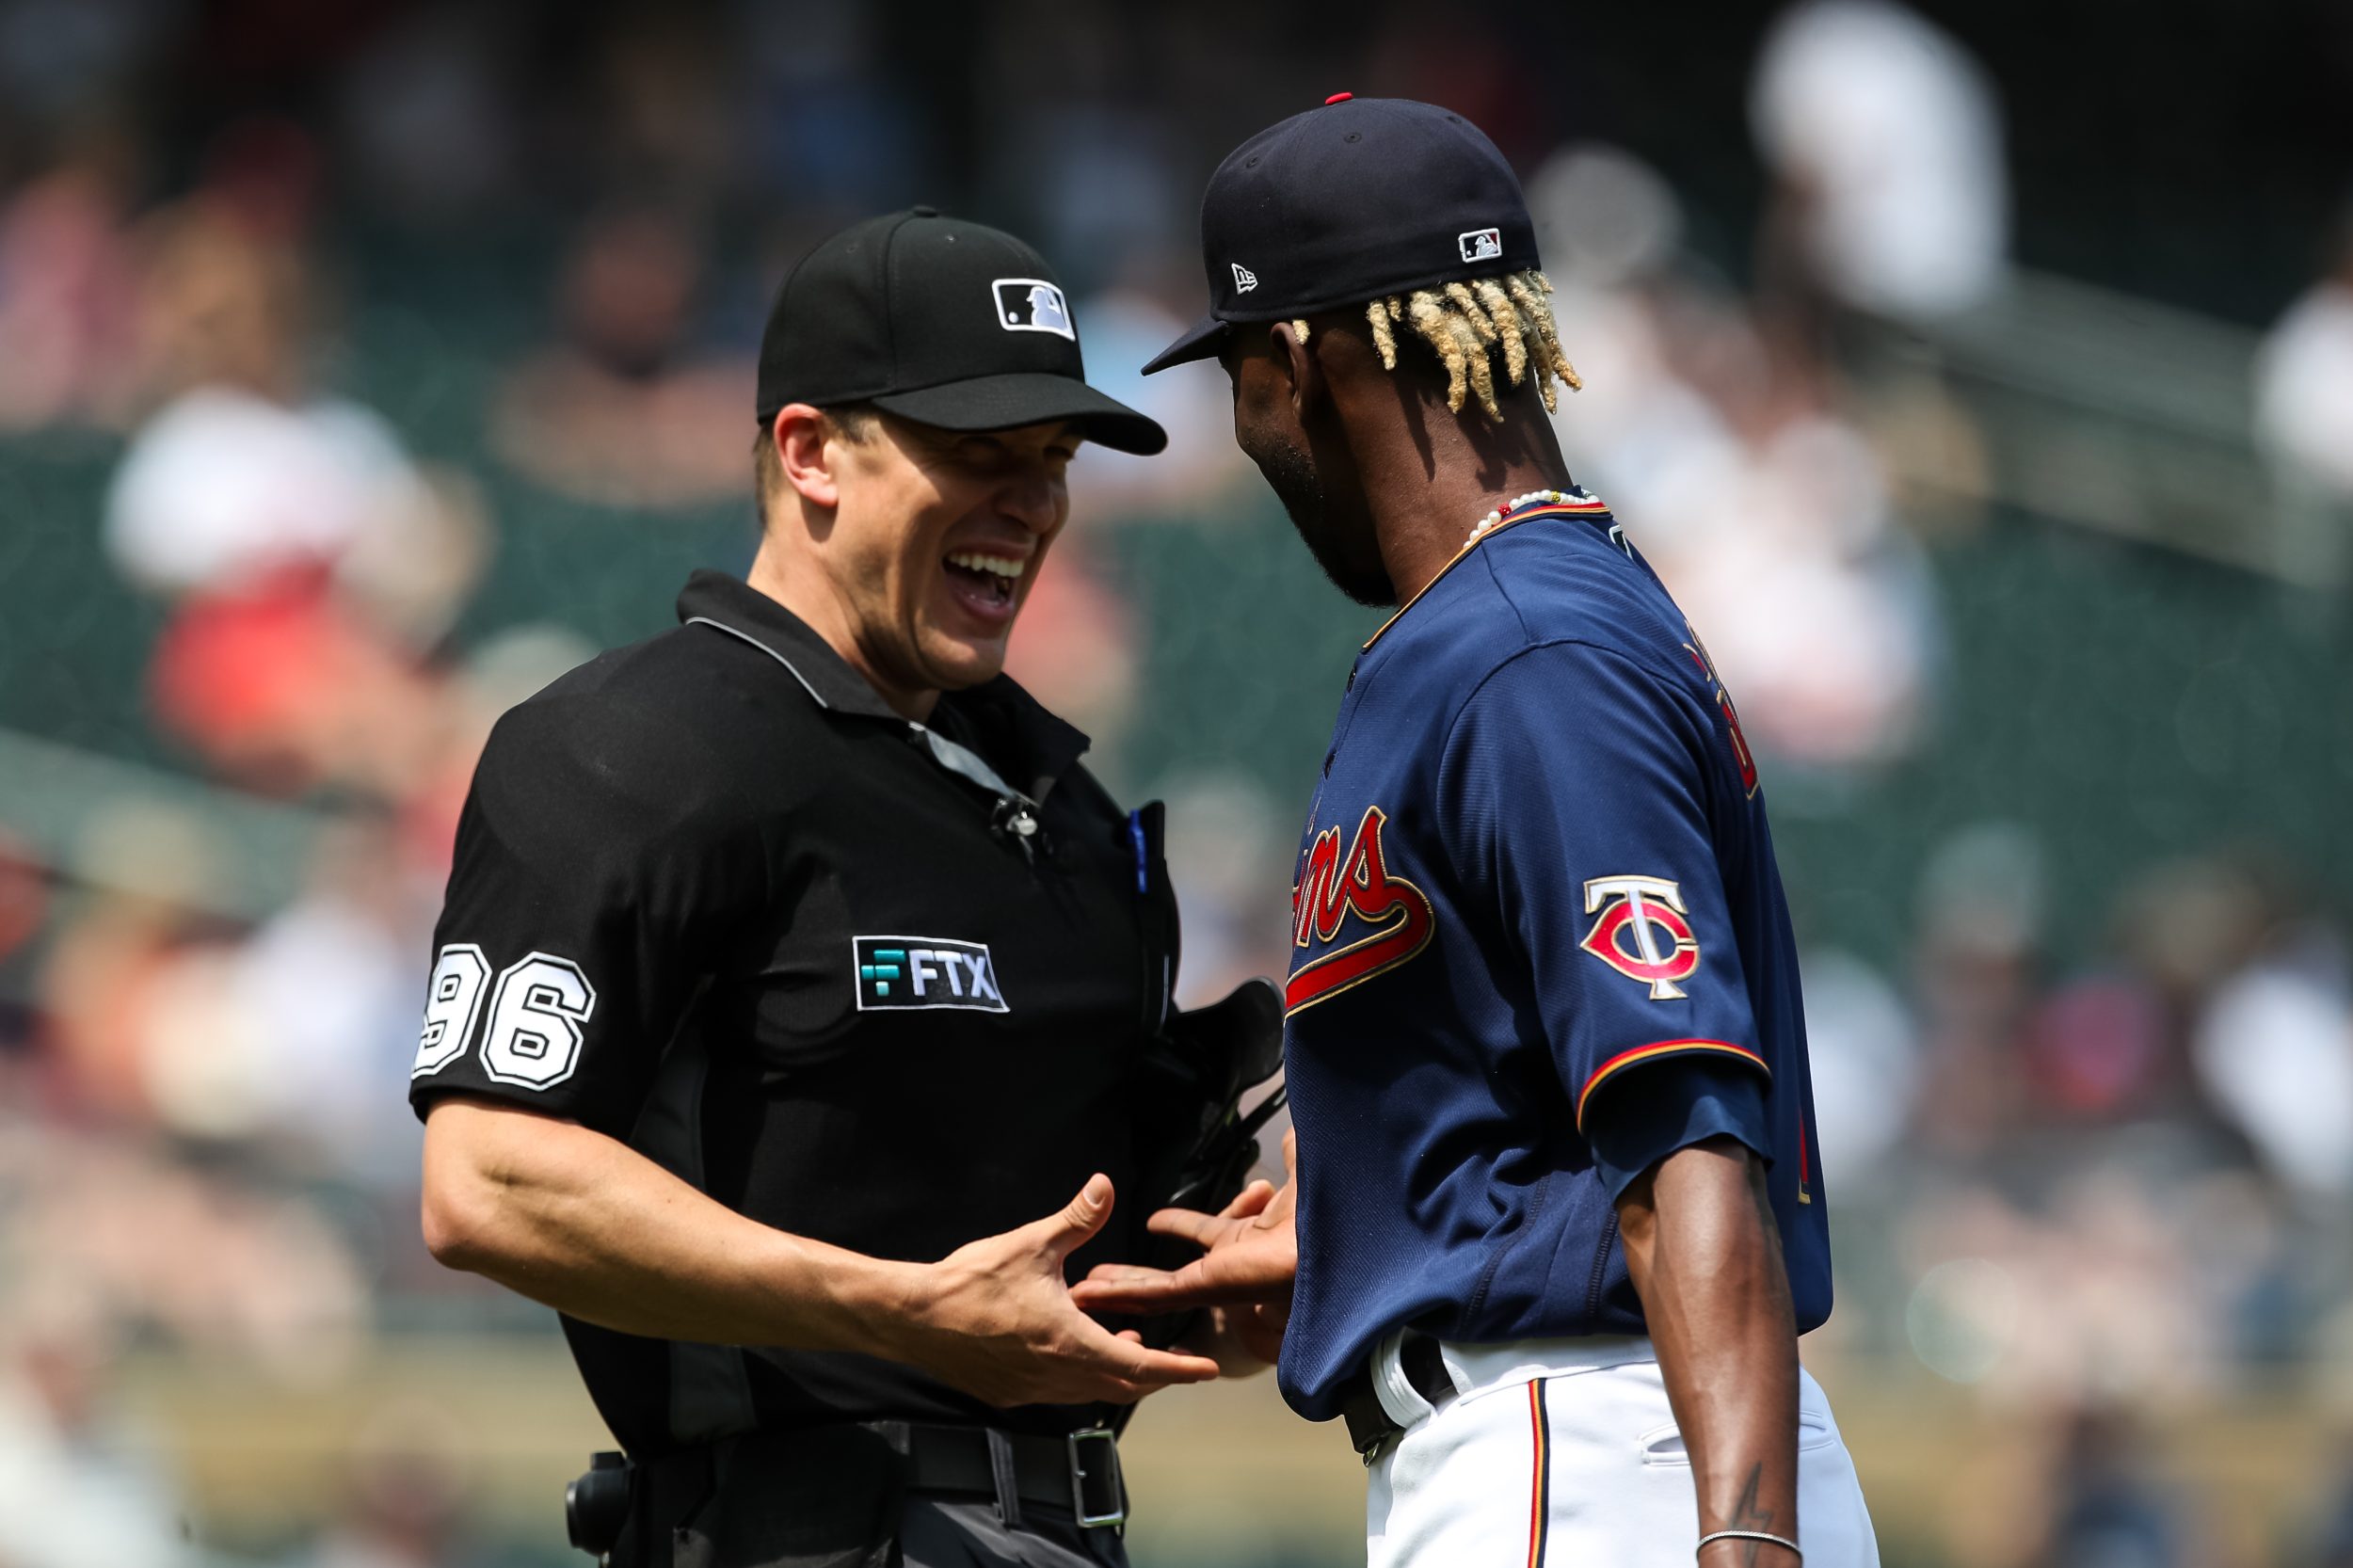 Umpire Chris Segal #96 laughs as he checks the throwing hand of Nick Gordon #1 of the Minnesota Twins for foreign substances.